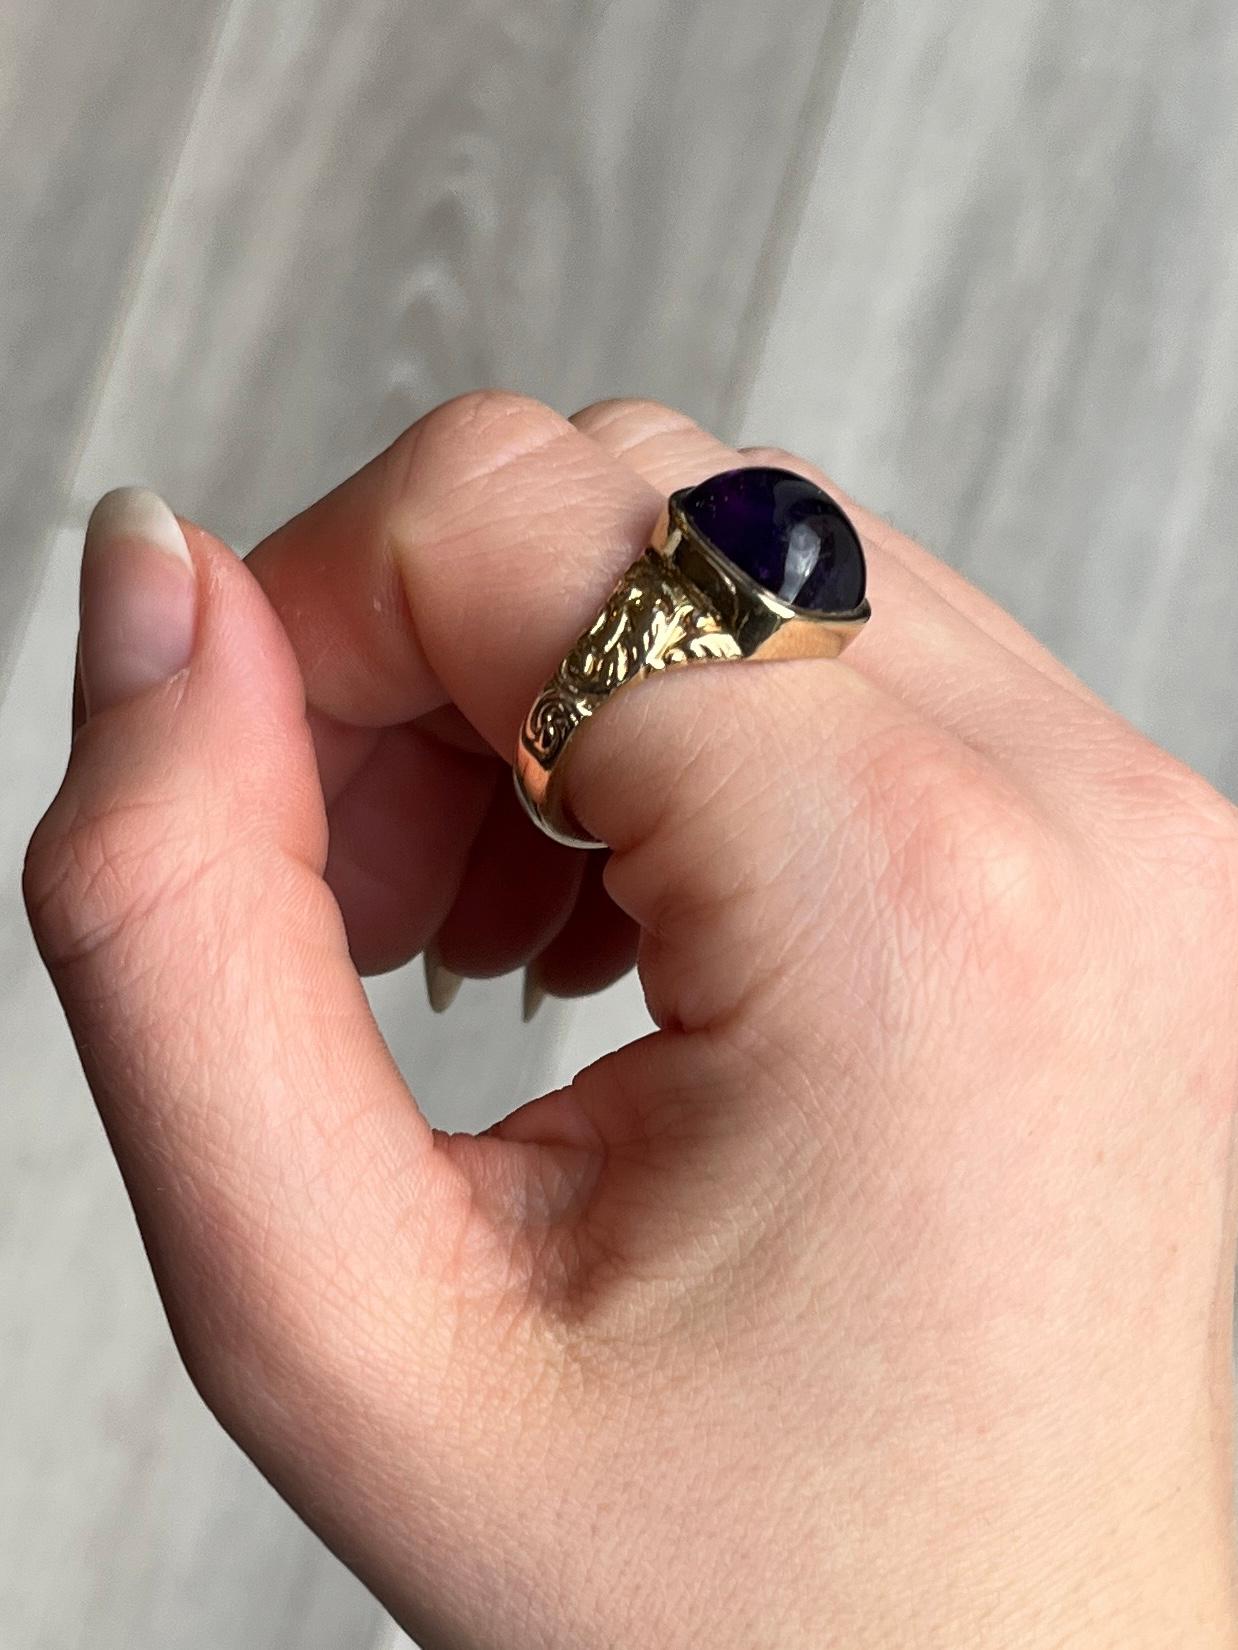 This glossy and bright purple amethyst stone is surrounded by a chunky frame of gold and the shoulders are moulded and ornate. Modelled in 9ct gold. Hallmarked London 1966.

Ring Size: U or 10 
Stone Diameter: 12.5mm 
Height off finger: 8mm

Weight: